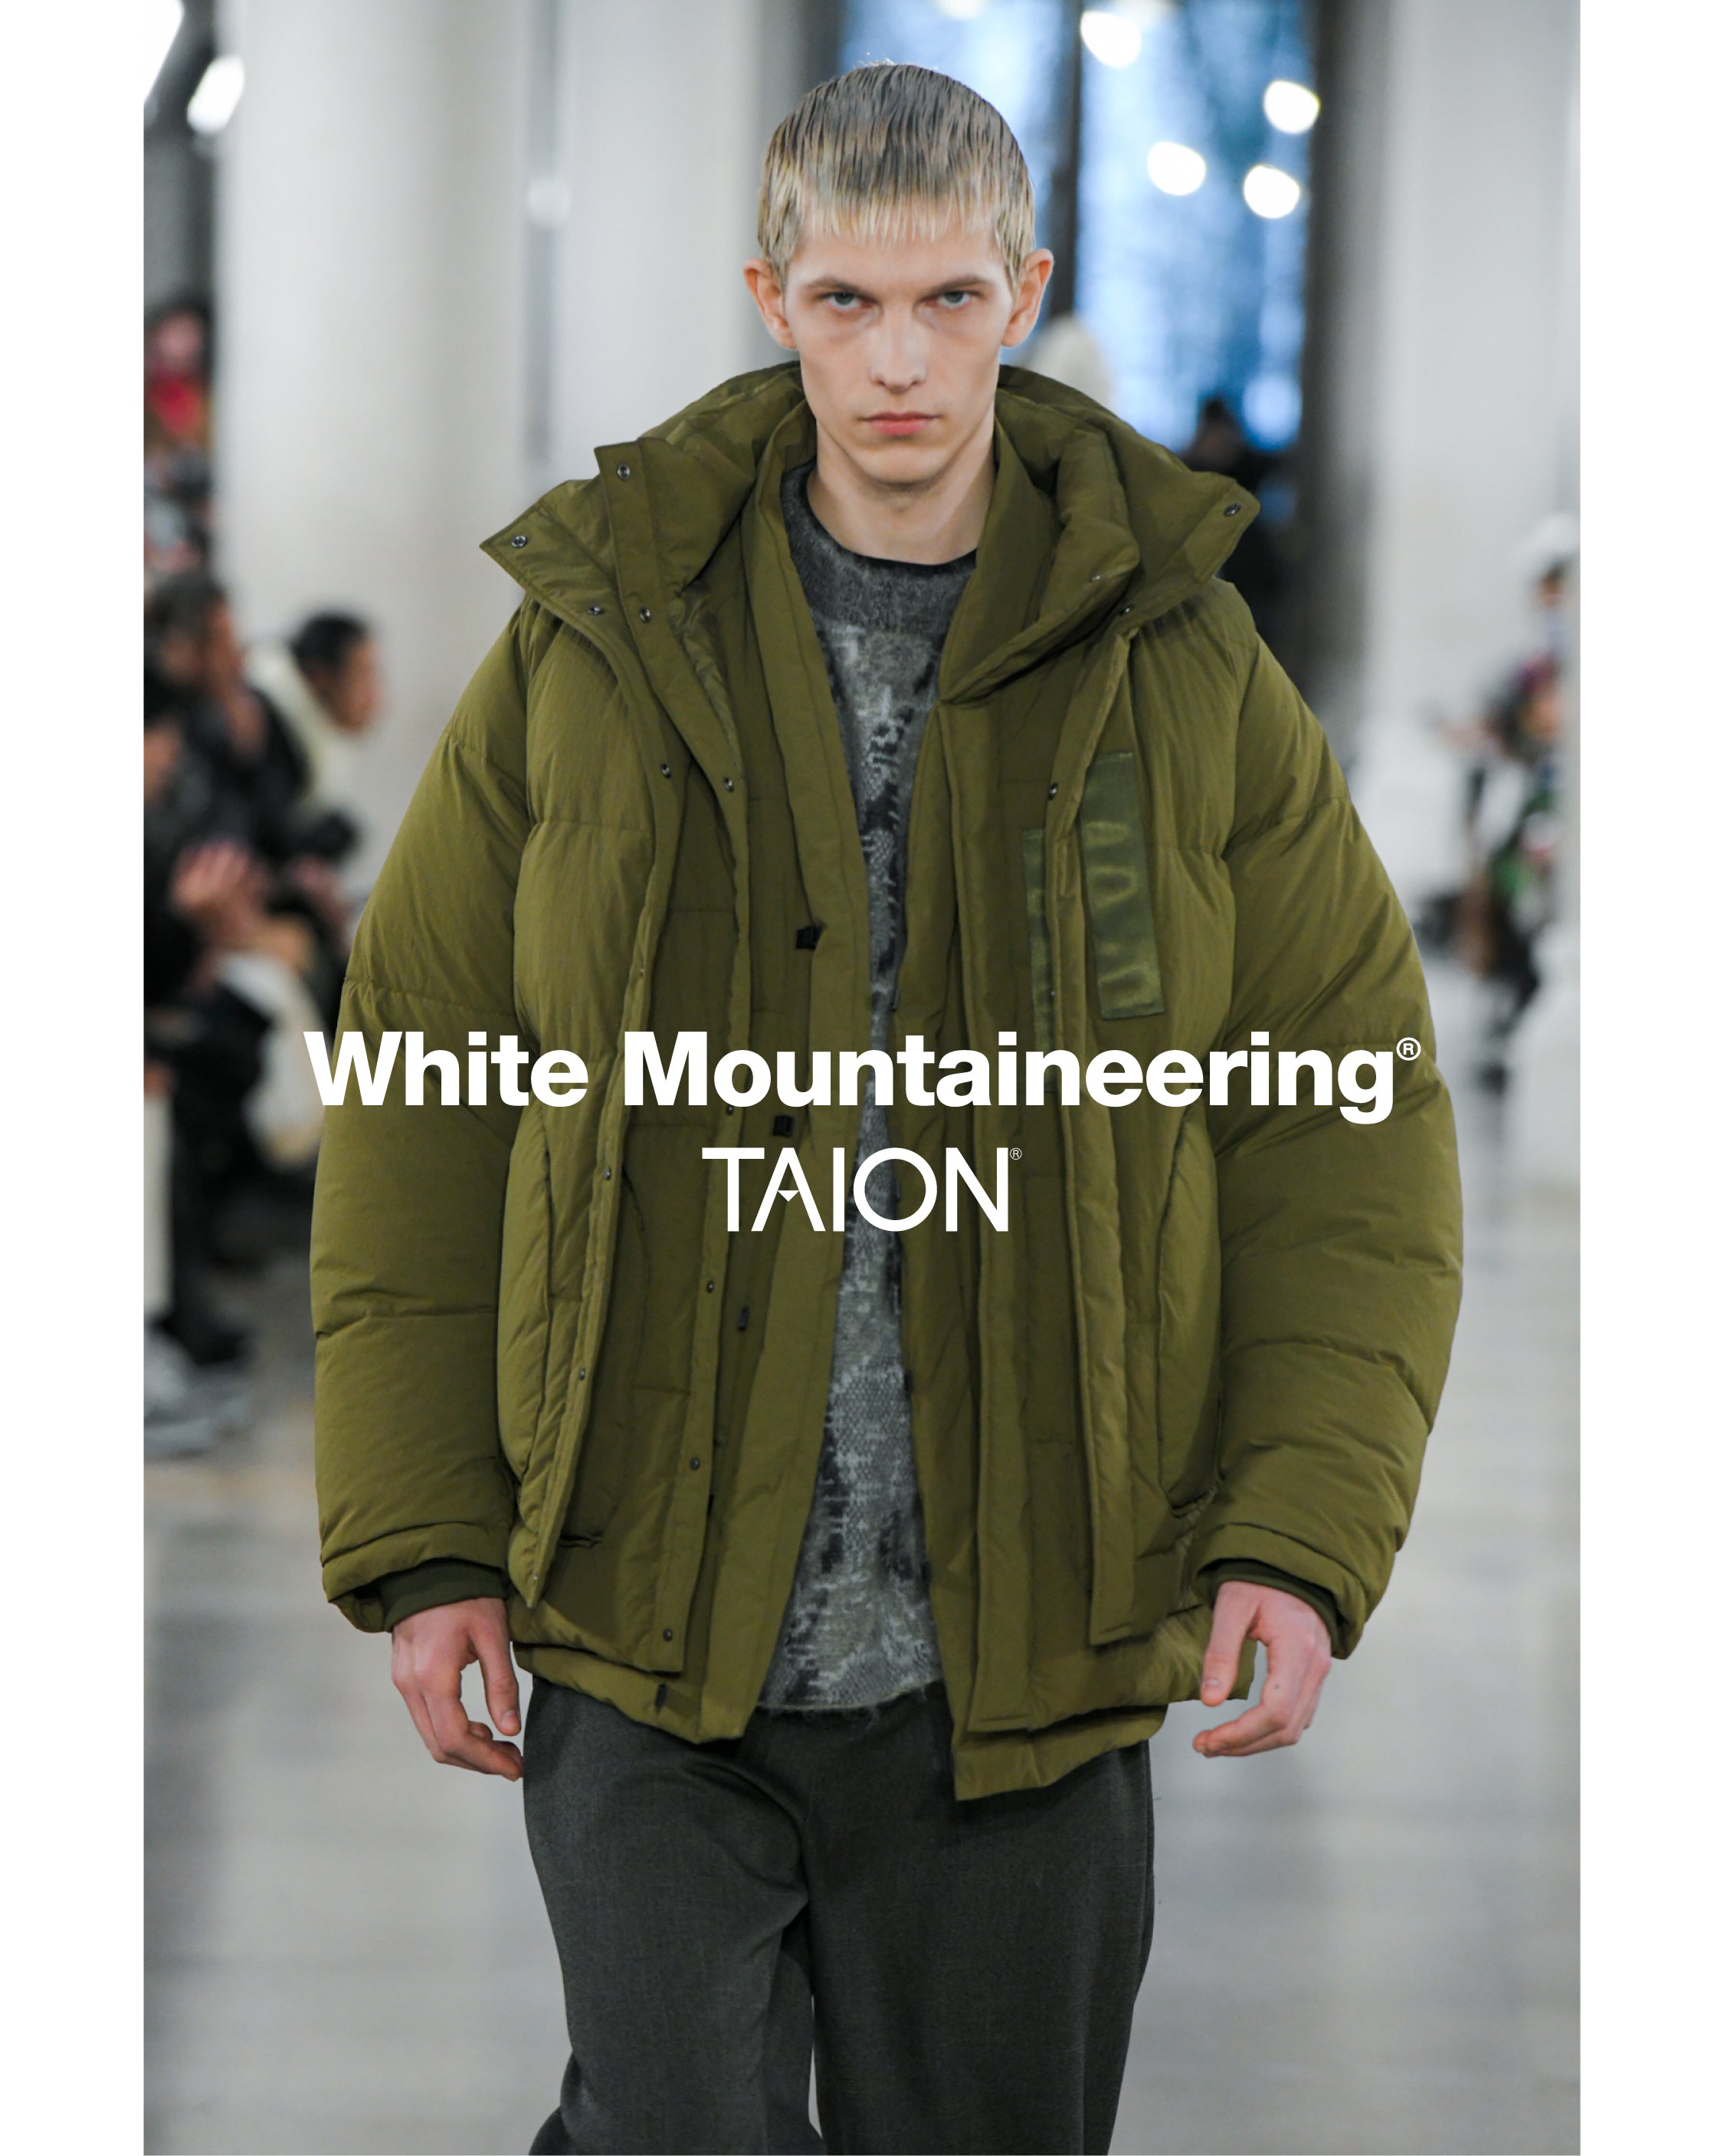 White Mountaineering × TAION – White Mountaineering OFFICIAL WEB SITE.